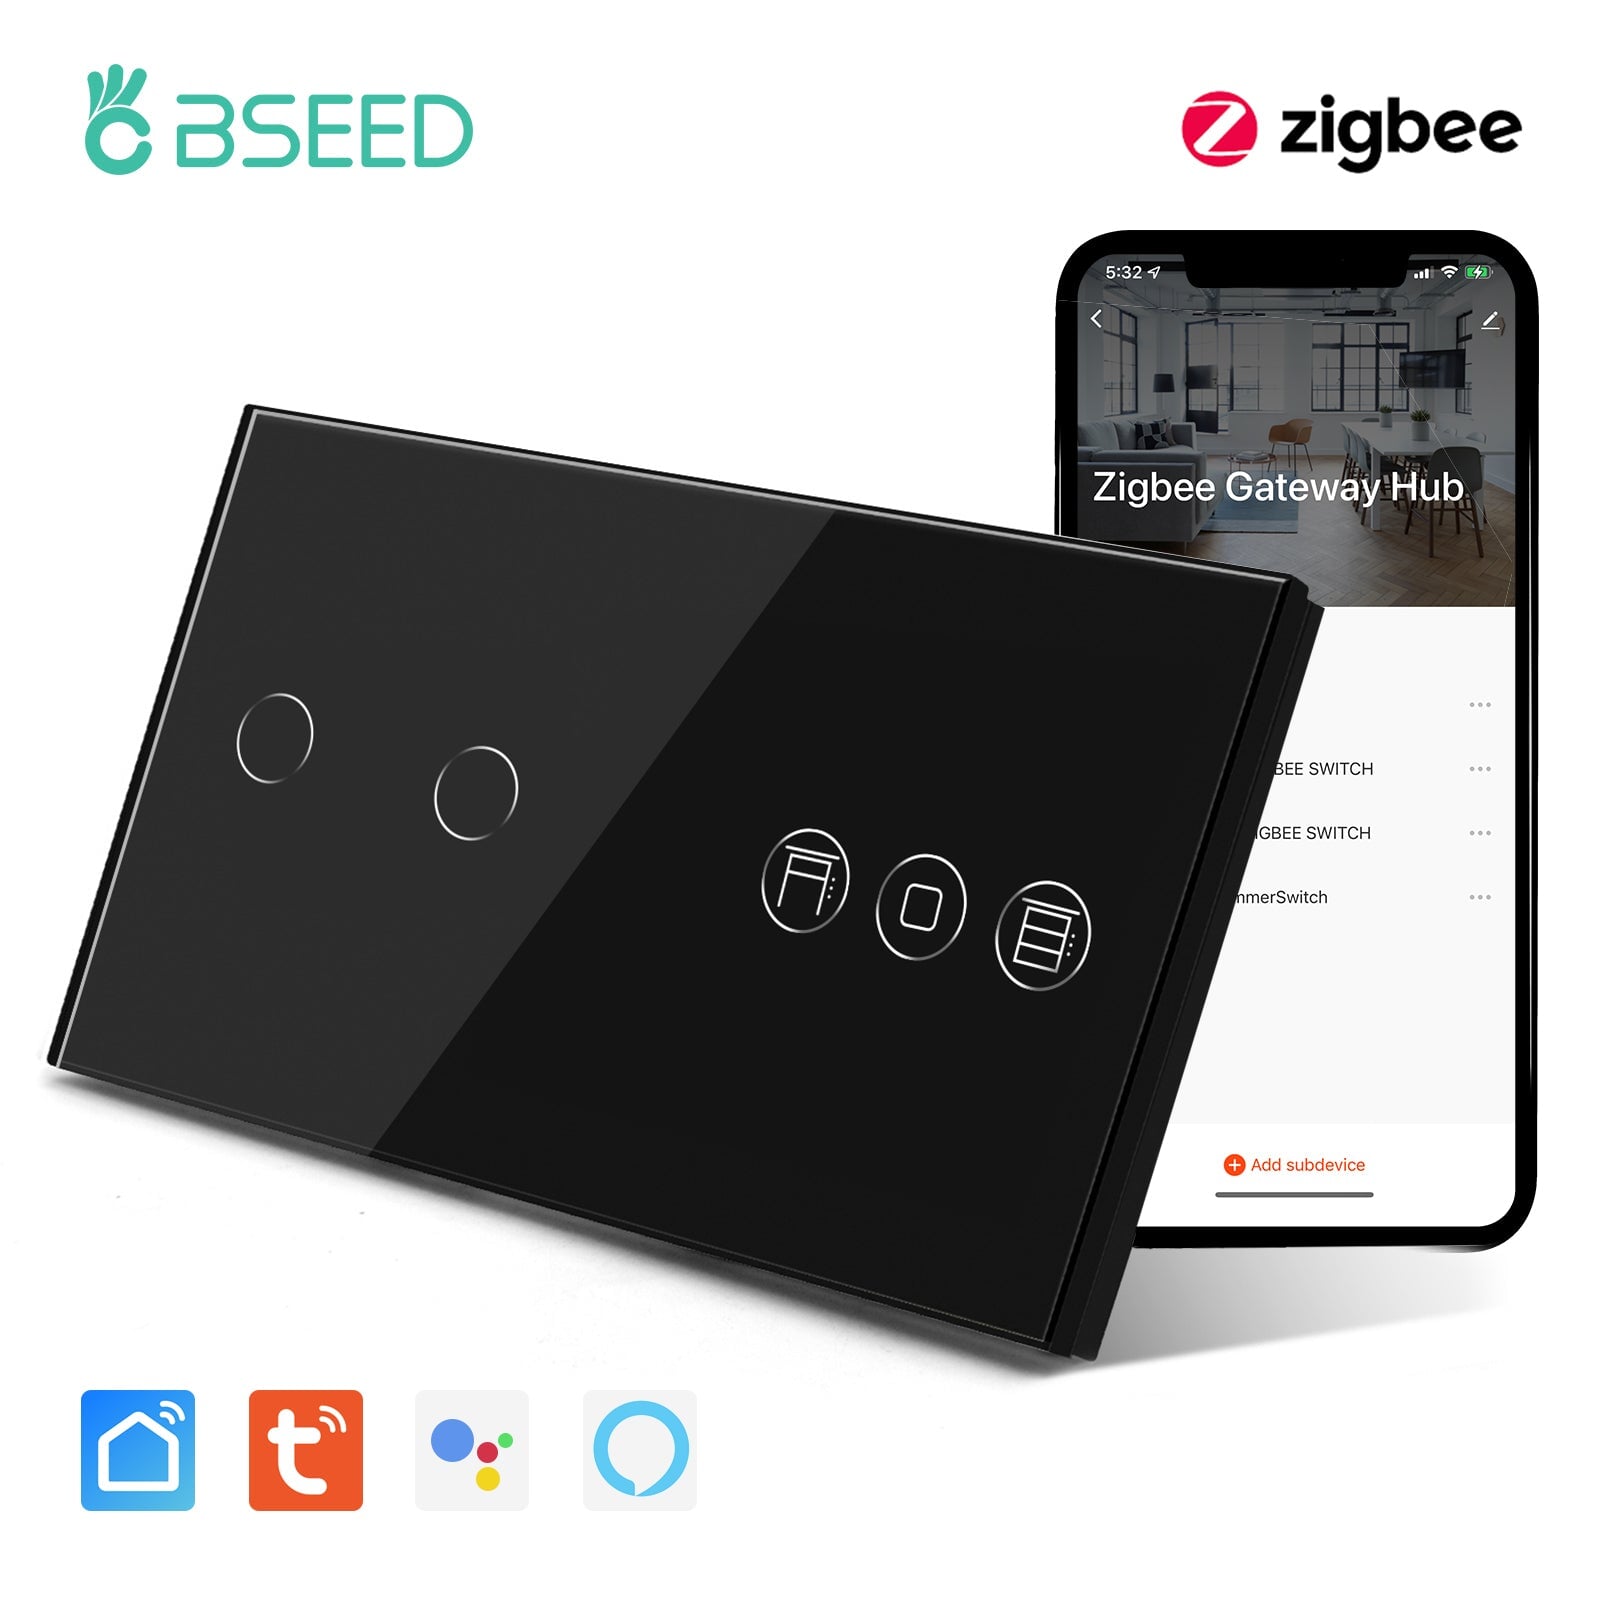 BSEED Zigbee light switch with Shutter Switch Bseedswitch Black 2gang 